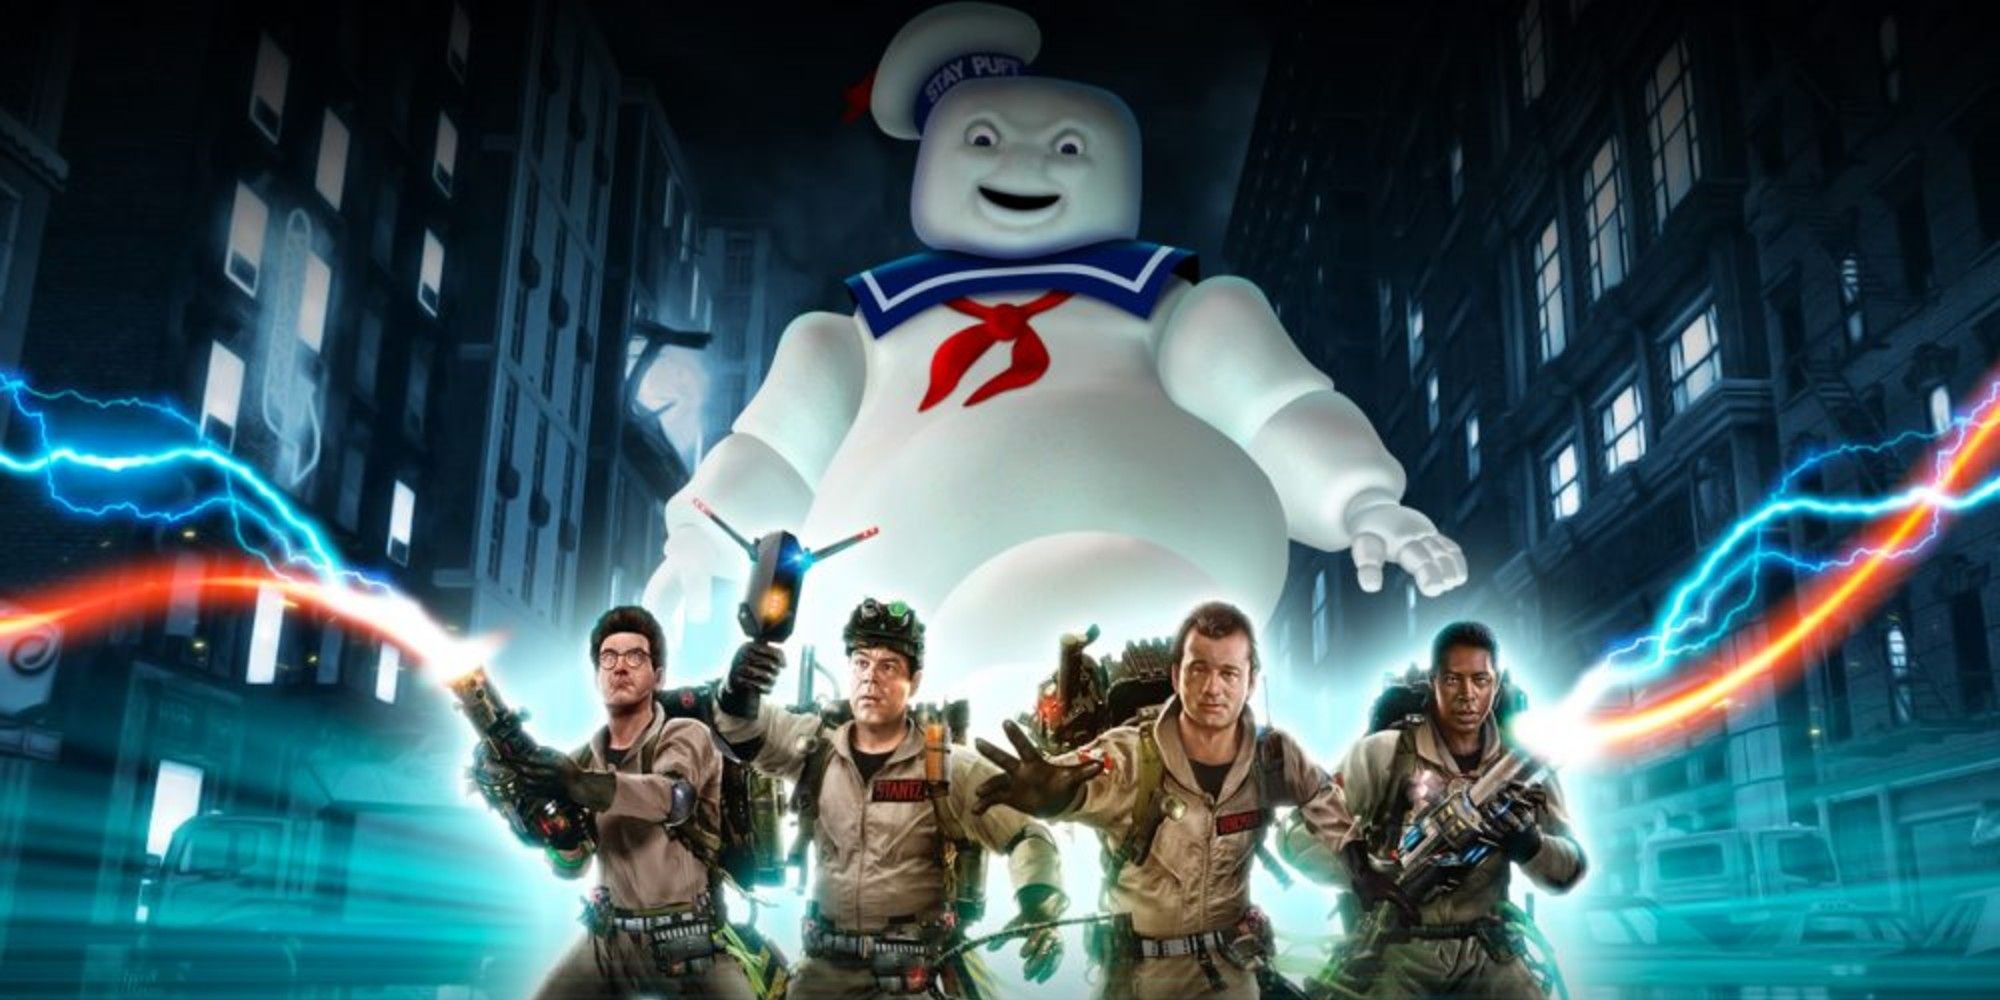 ghostbusters games